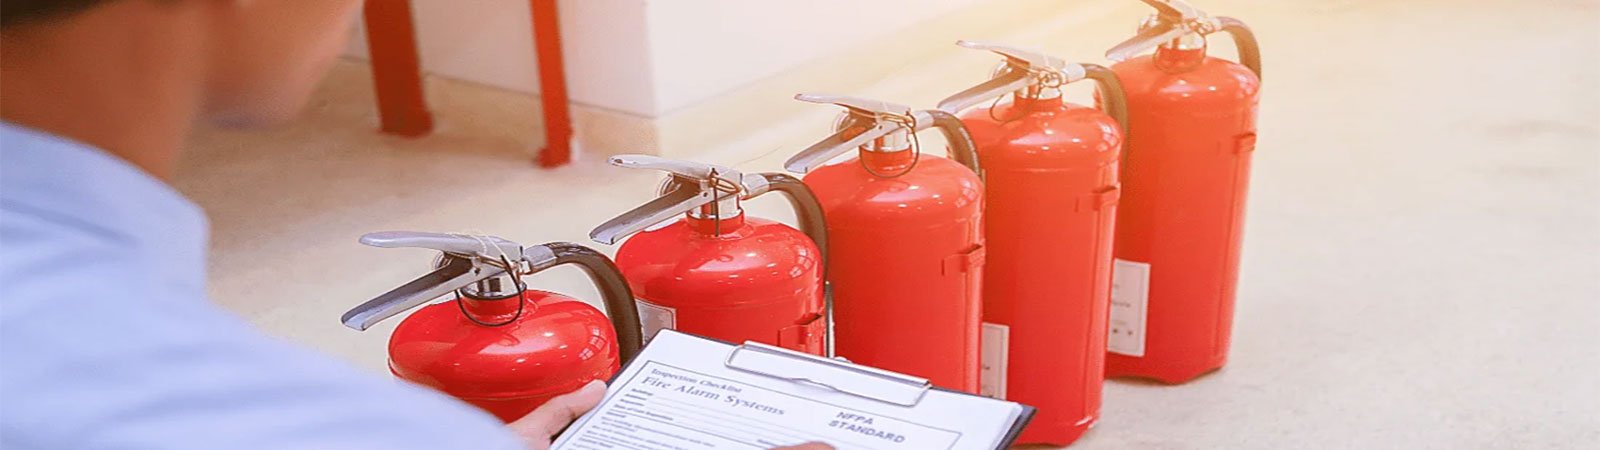 10 Tips for Fire Safety in the Workplace